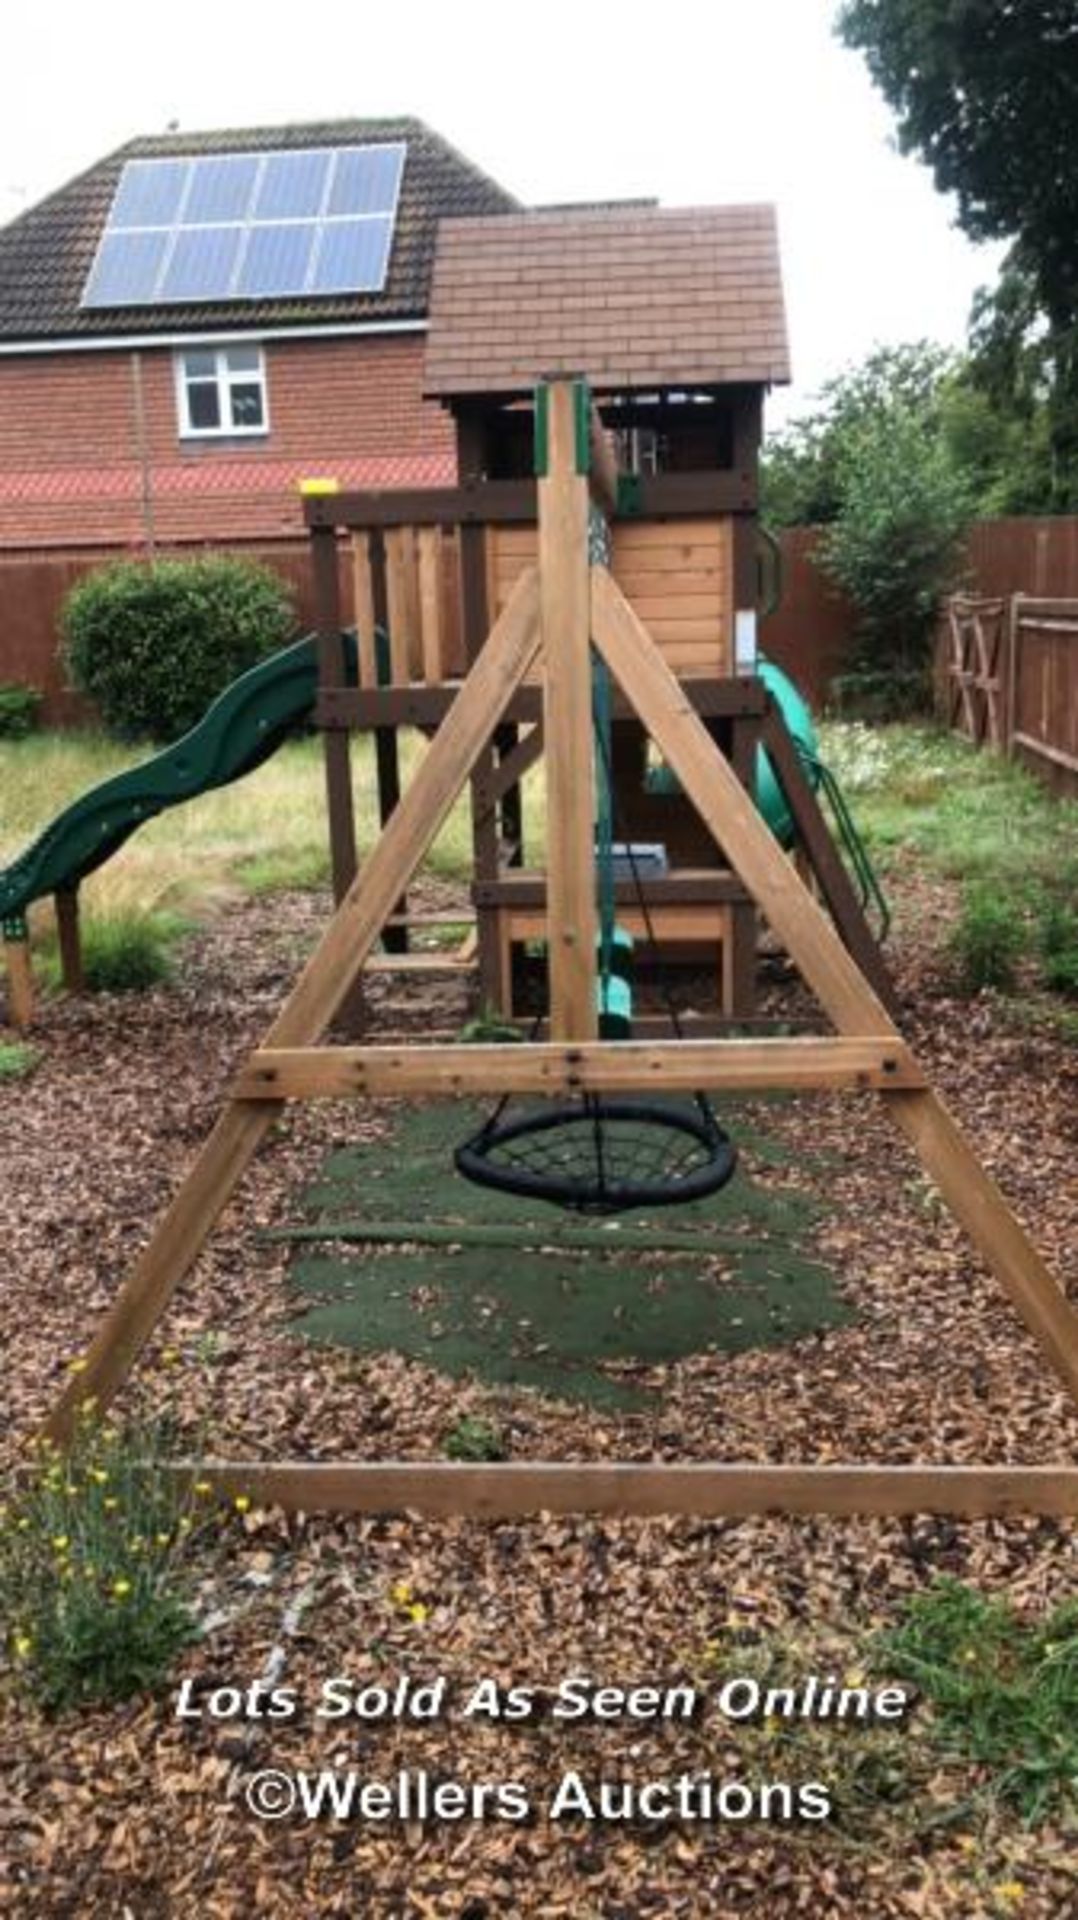 BACKYARD DISCOVERY CHILDREN'S ADVENTURE PLAY AREA, WITH 3X SWINGS, 2X SLIDES, BBQ AREA AND ROCK - Image 8 of 8